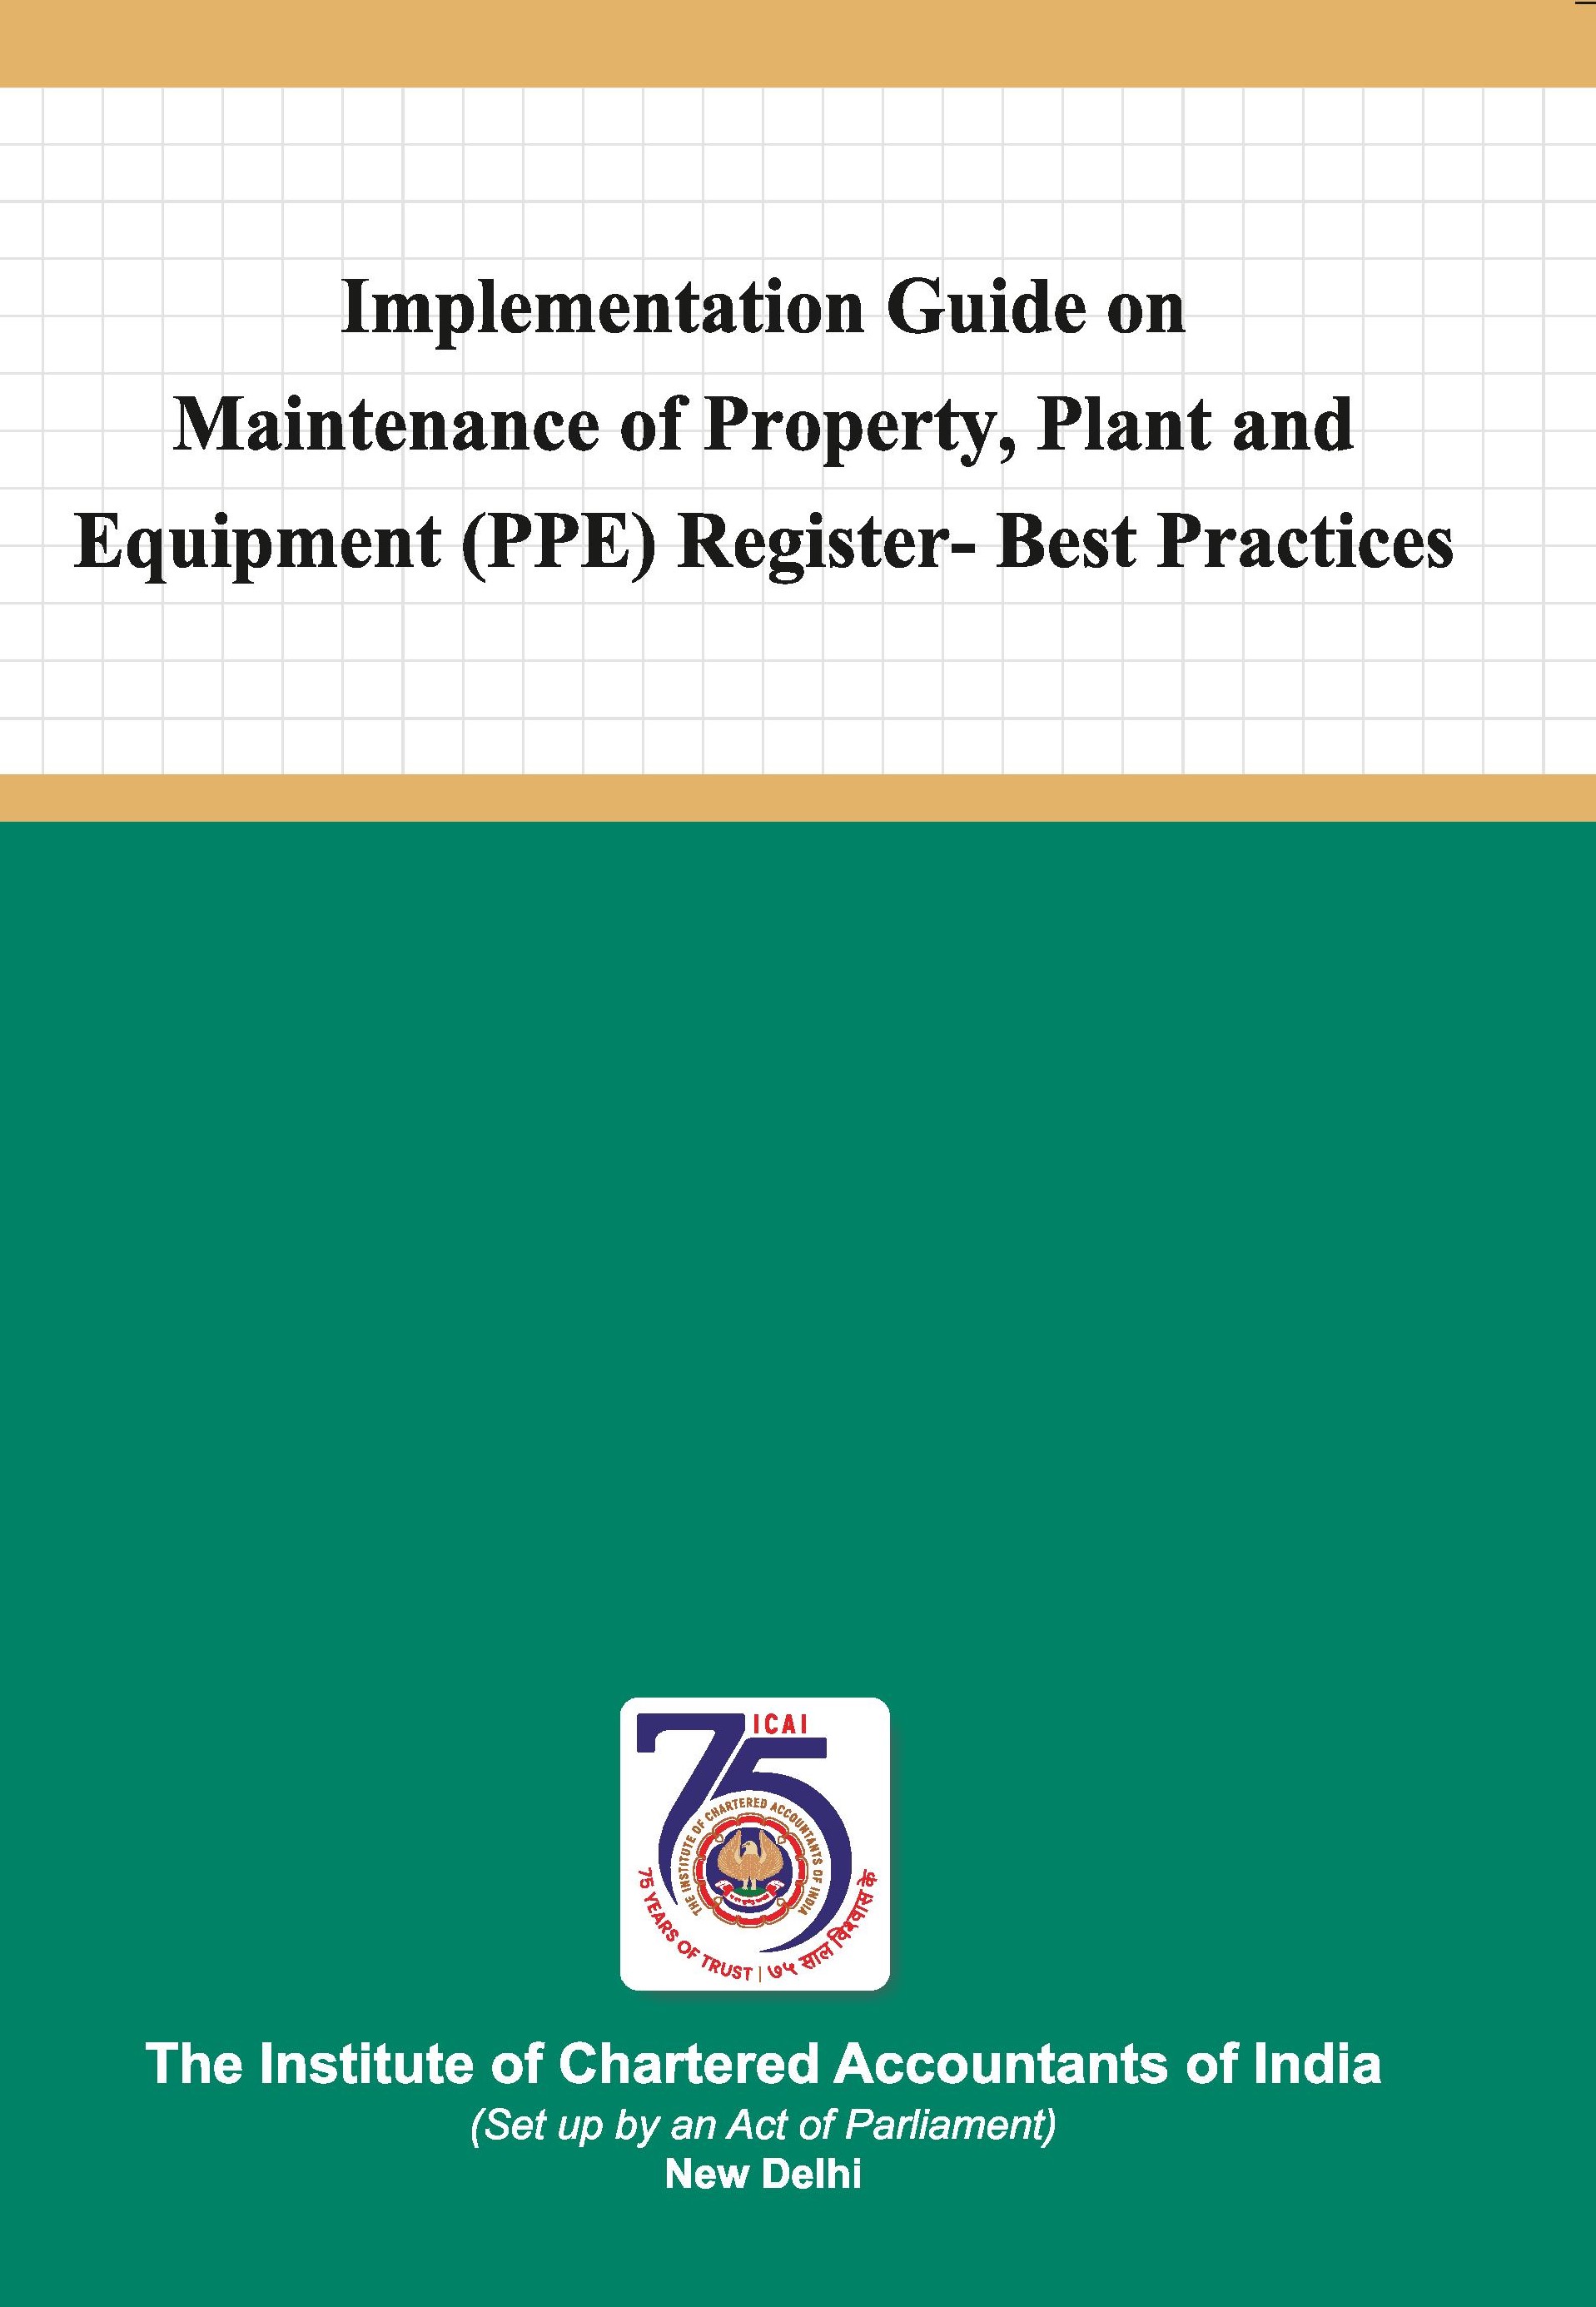 Implementation Guide on Maintenance of Property, Plant and Equipment (PPE) Register- Best Practices - February, 2024